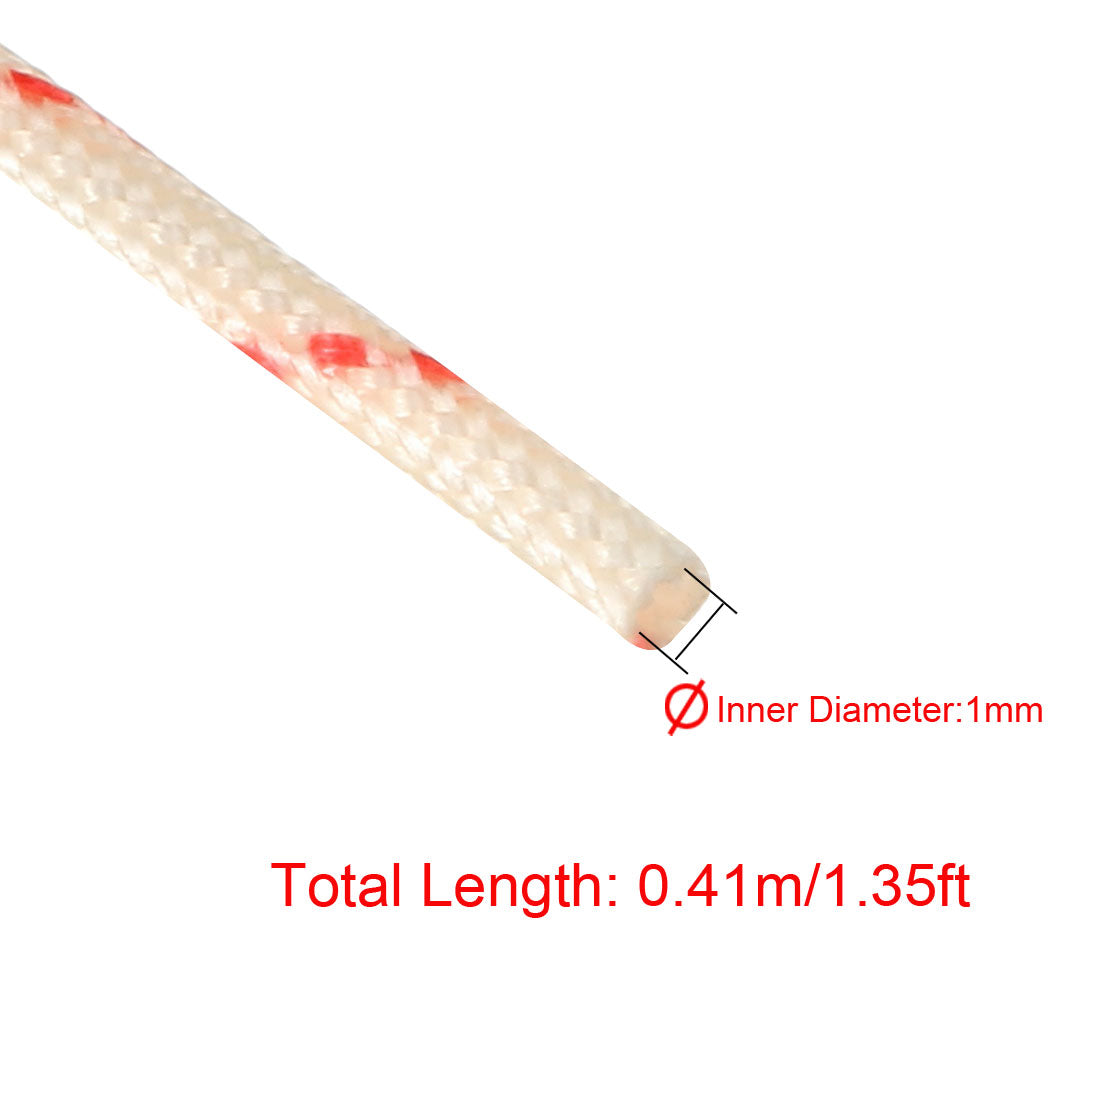 uxcell Uxcell Fiberglass Sleeve 1mm I.D. PVC Insulation Tubing 1500V Tube Adjustable Sleeving Pipe 125 Degree Centigrade Cable Wrap Wire 410mm 1.35ft 10Pcs